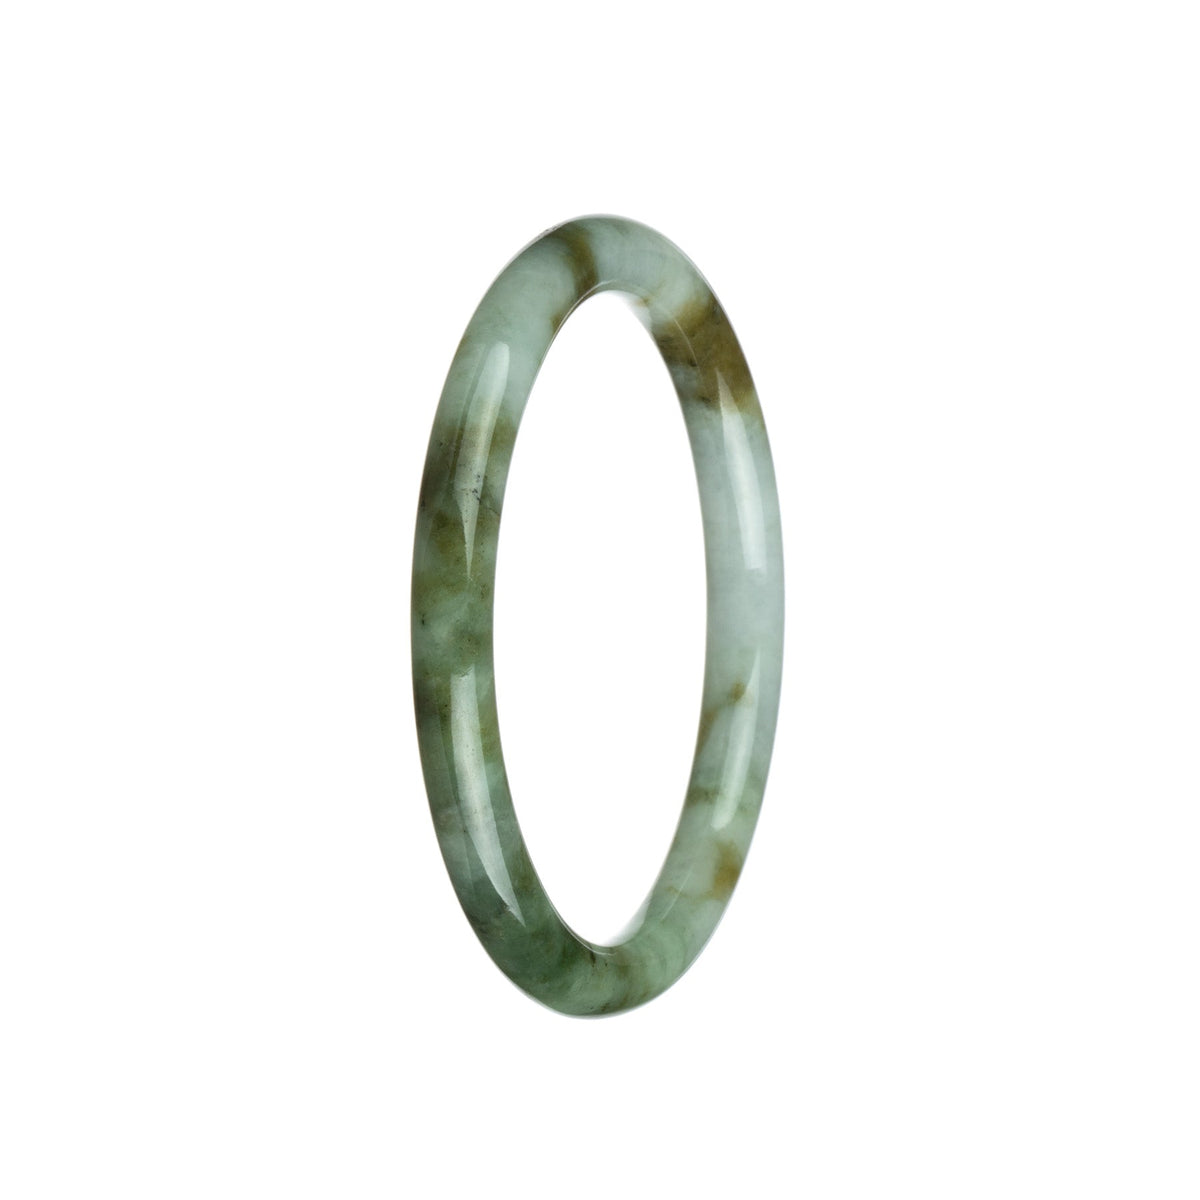 A small round Burma Jade bangle bracelet with a beautiful green, white, and brown pattern. Perfect for adding a touch of elegance to any outfit.